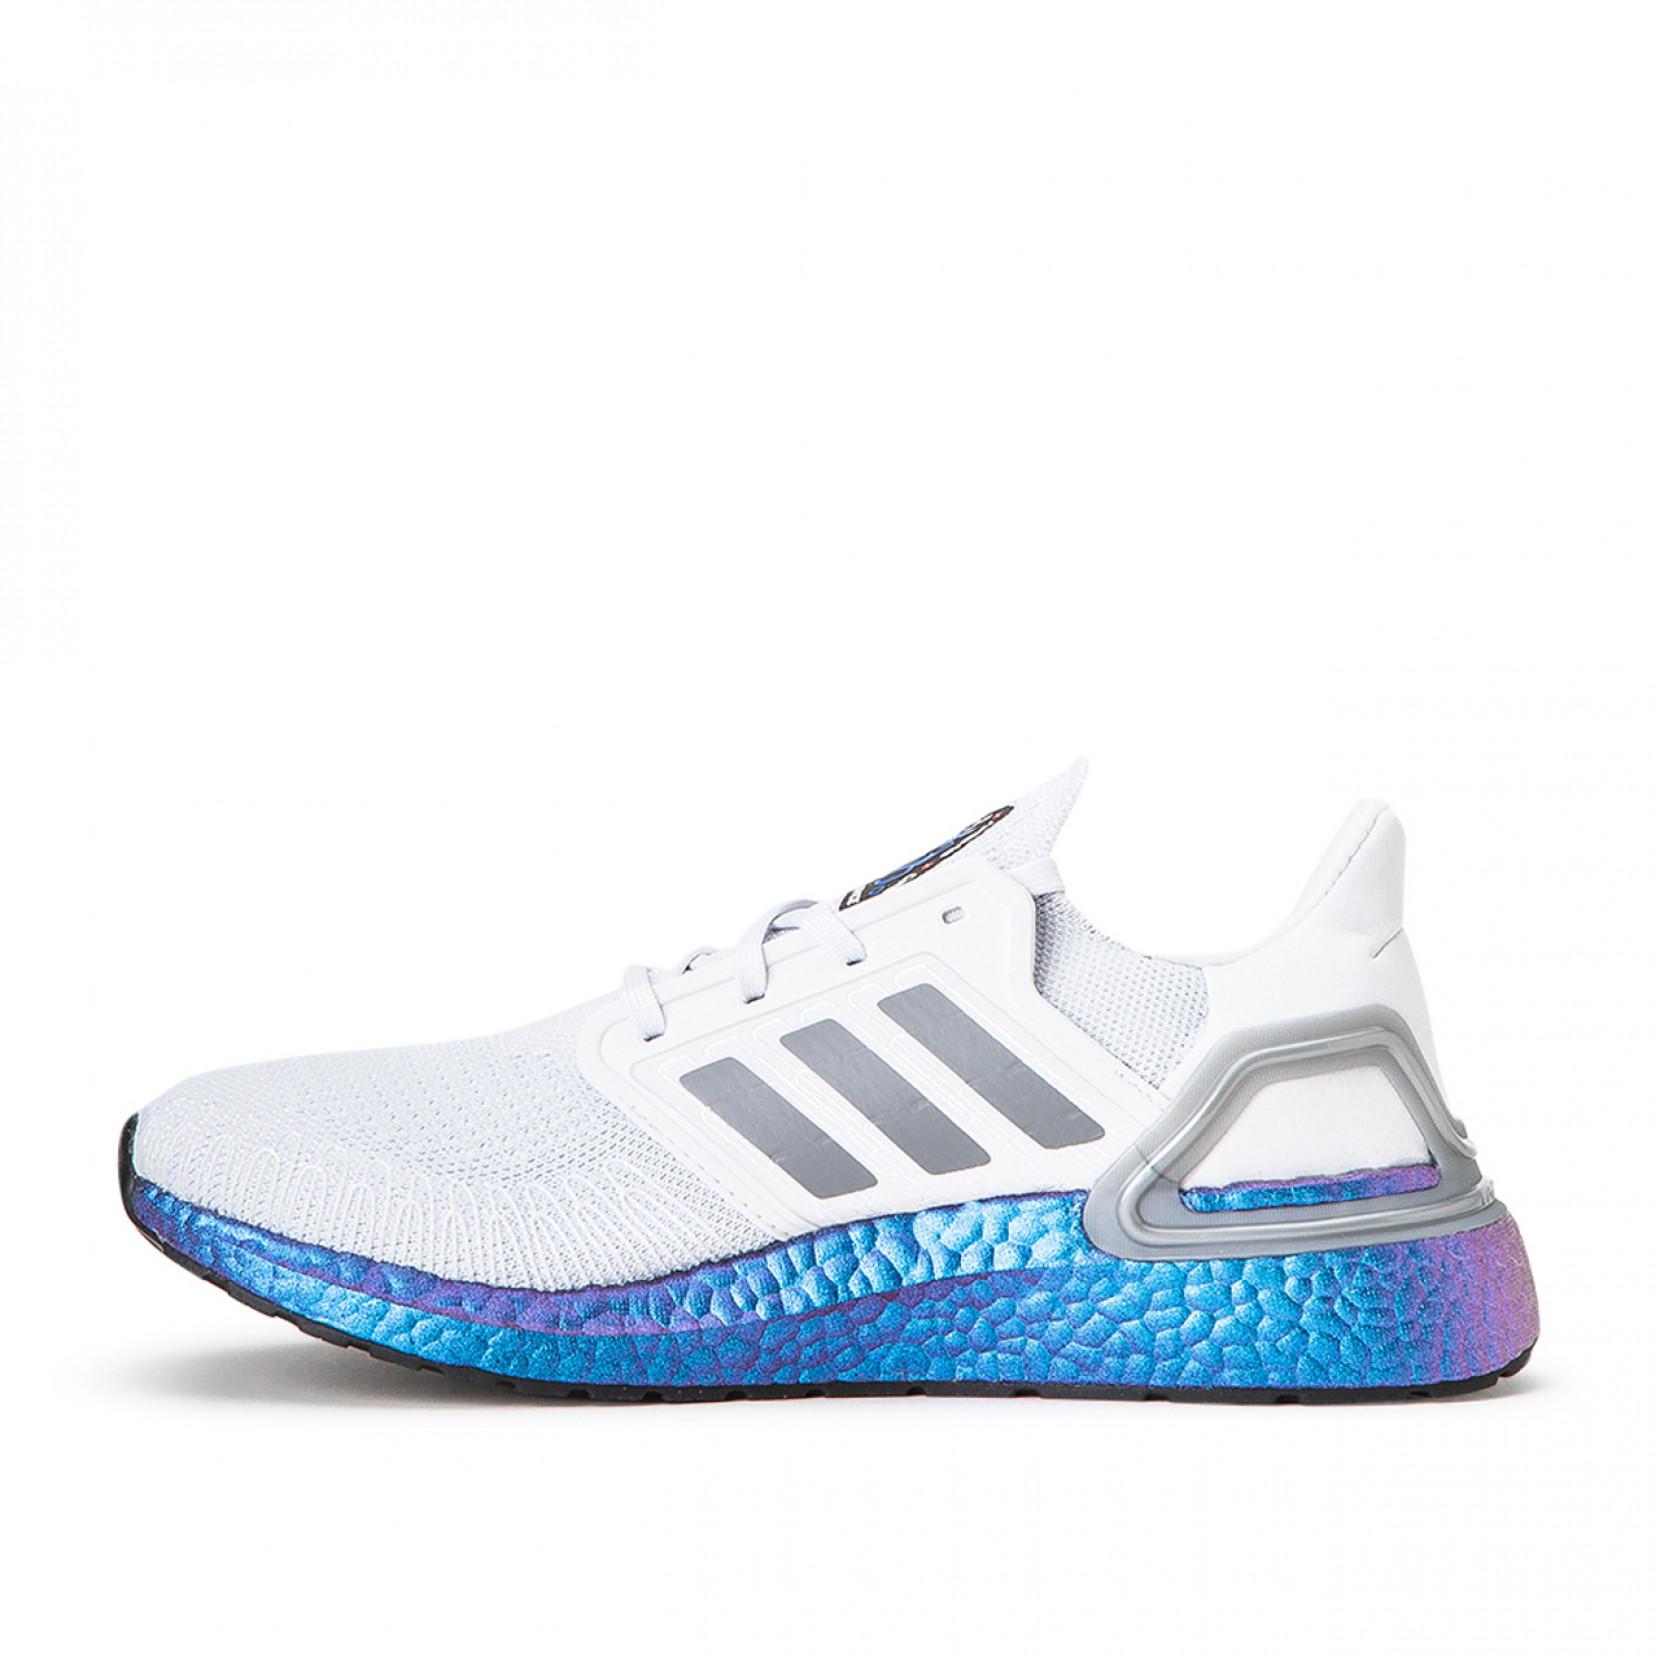 adidas Rubber Ultraboost 20 "international Space Station" in Grey (Gray) -  Lyst